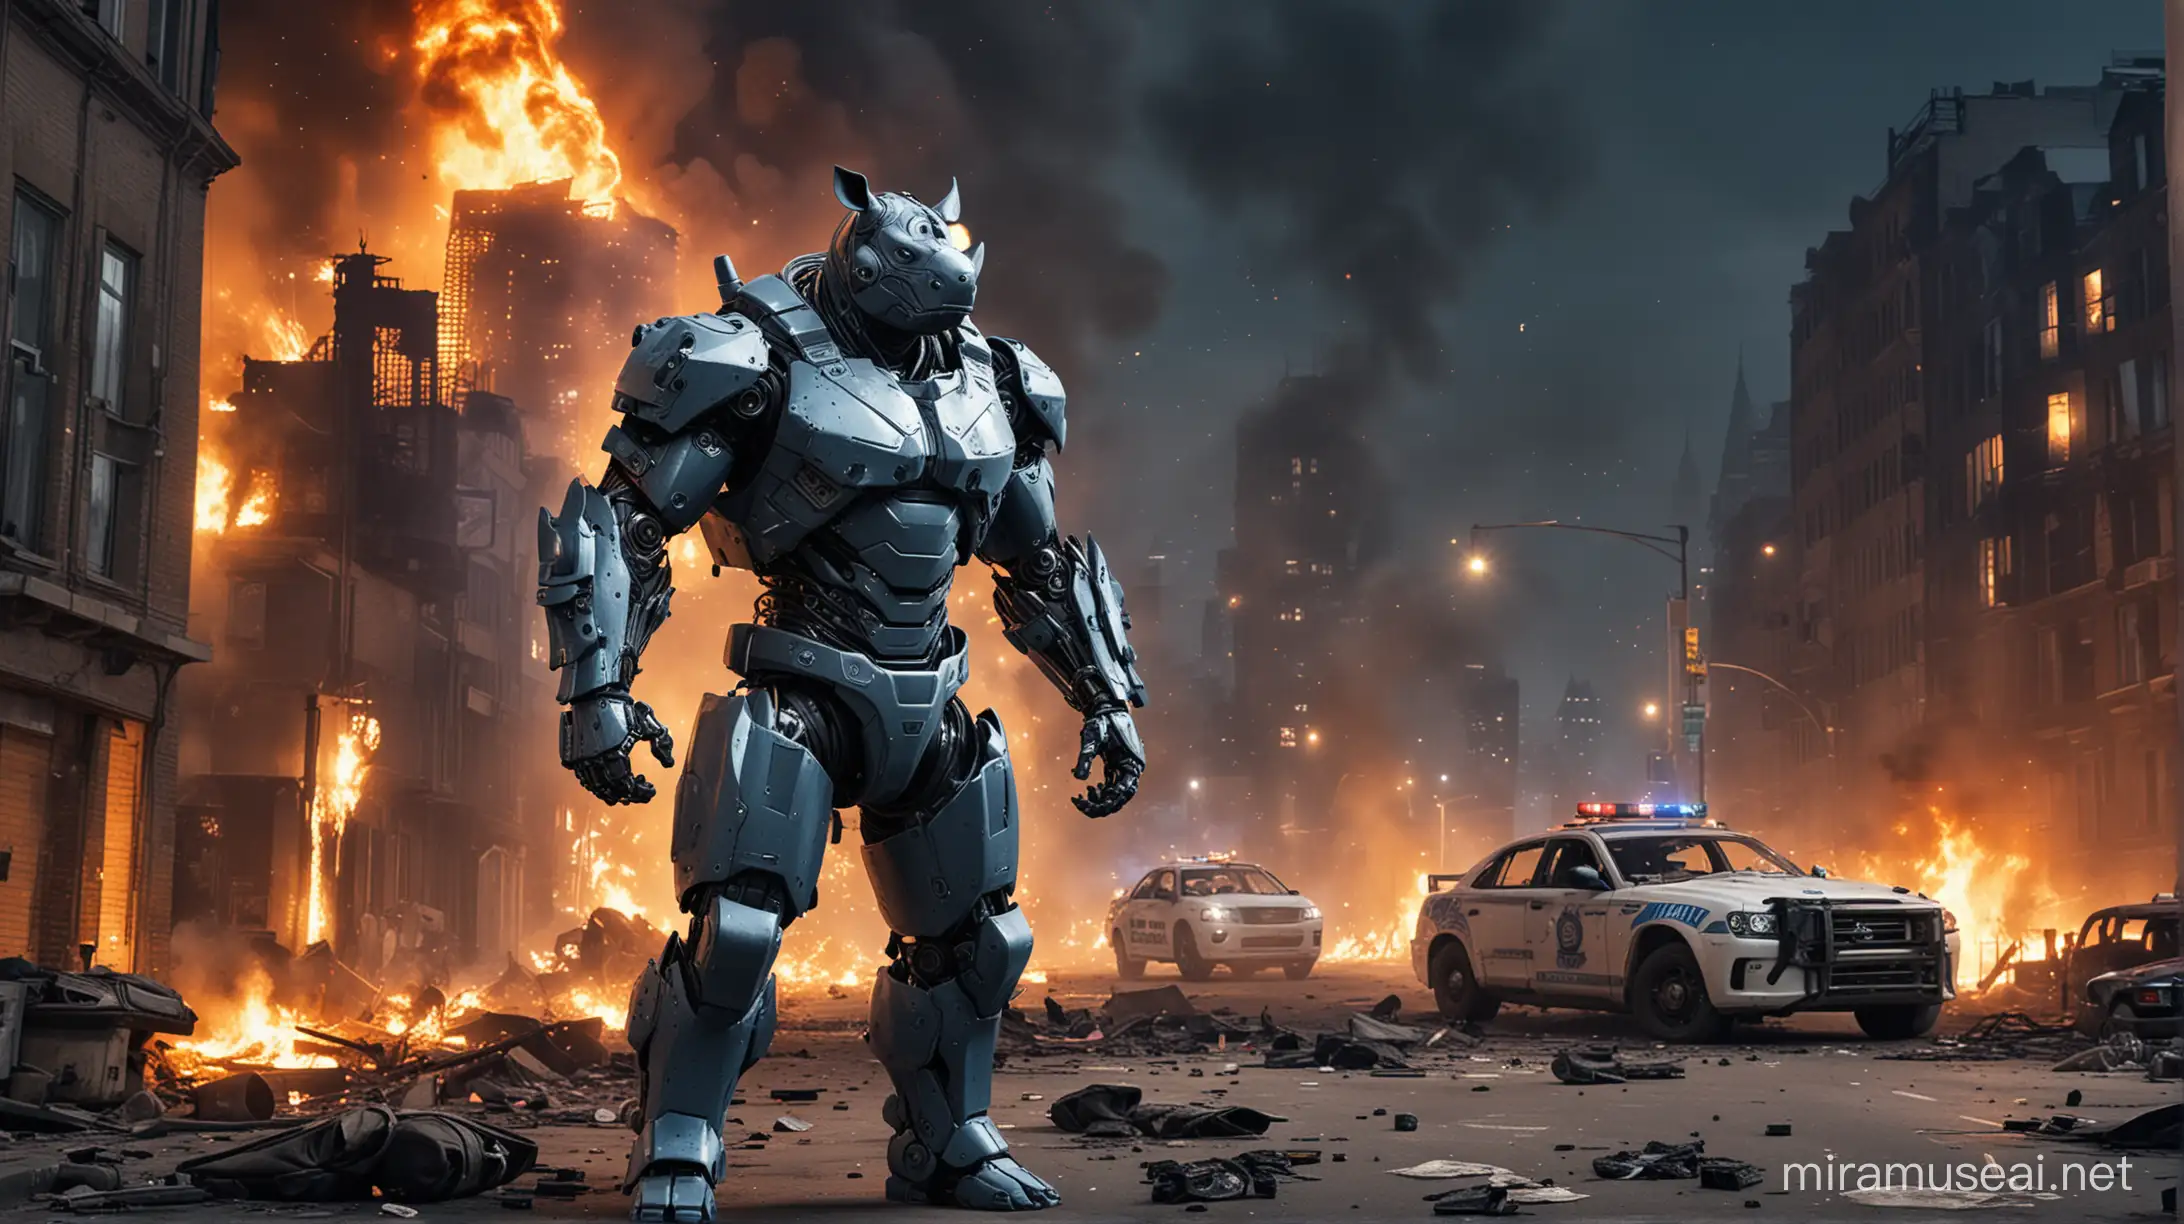 Night,a man as dress rhino robot destroyed city,police car,fire